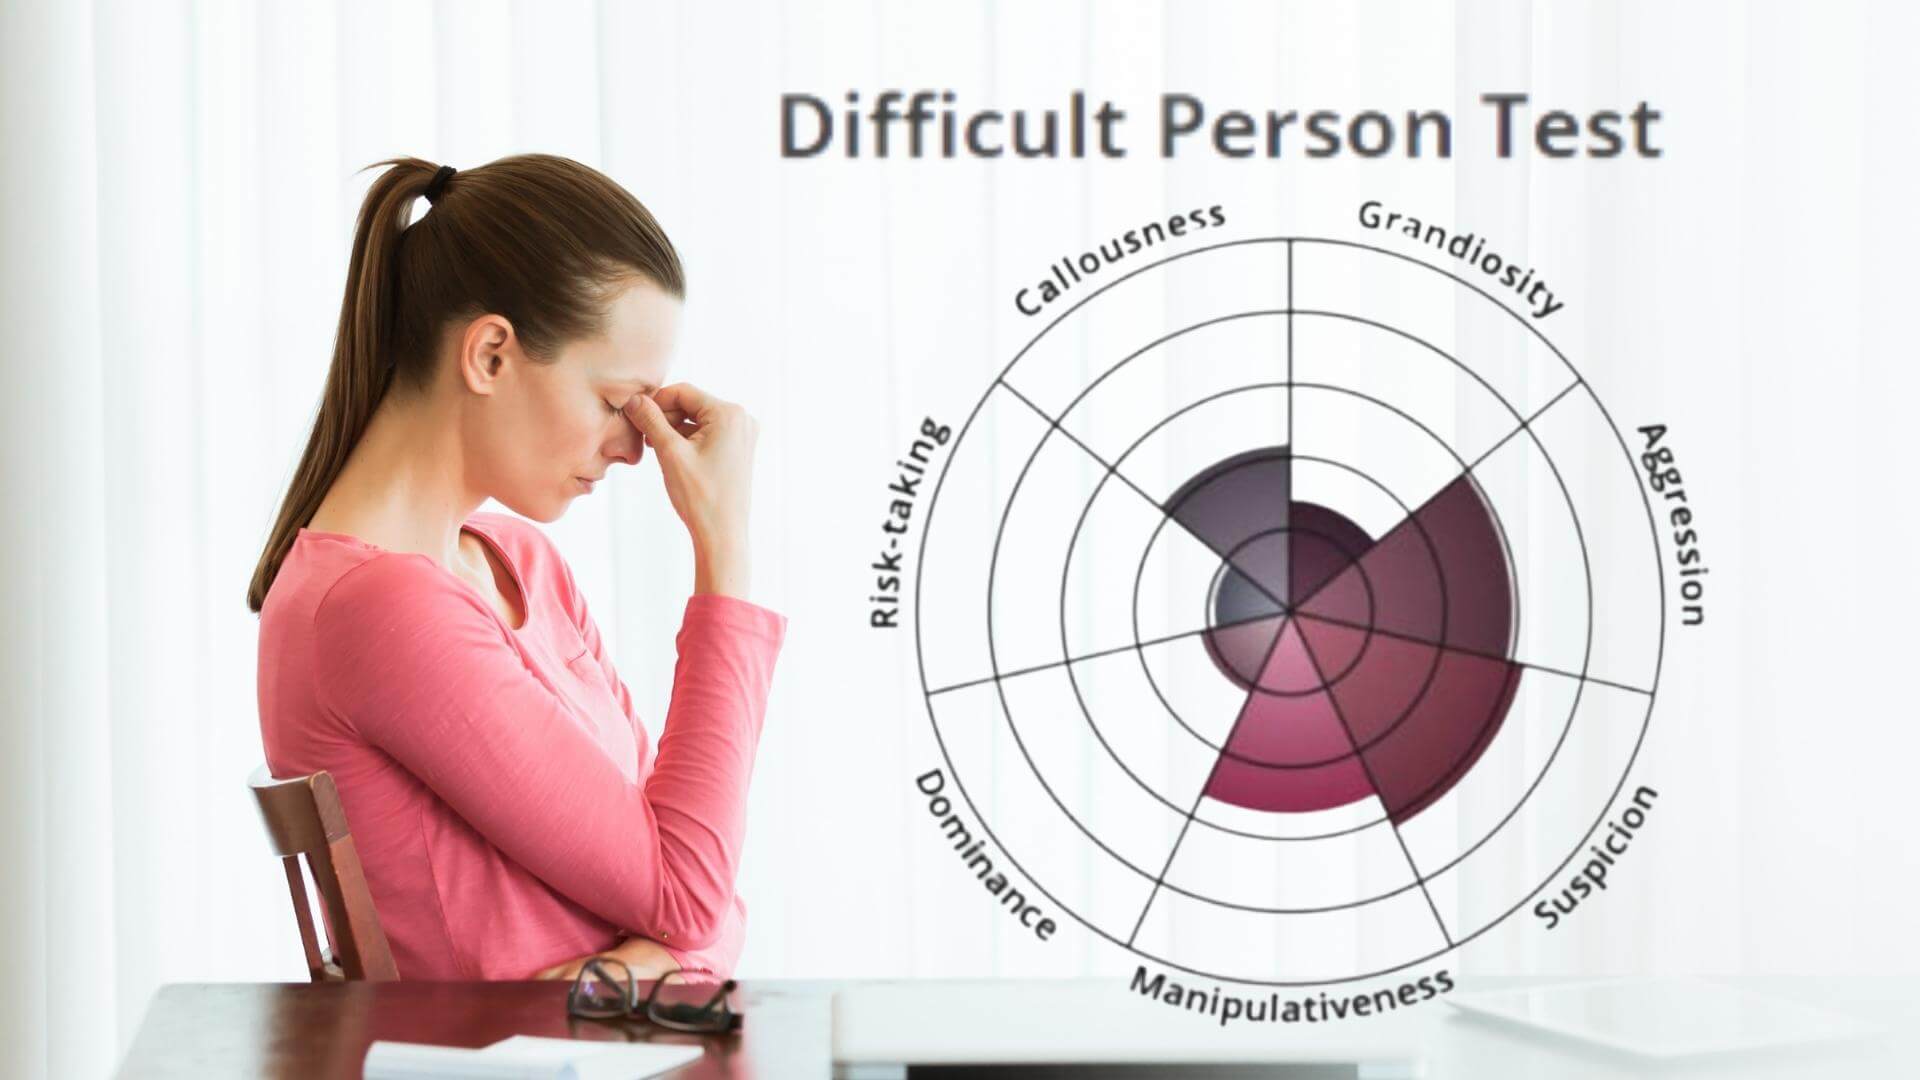 What Is The 'Difficult Person Test' And Should I Take It?